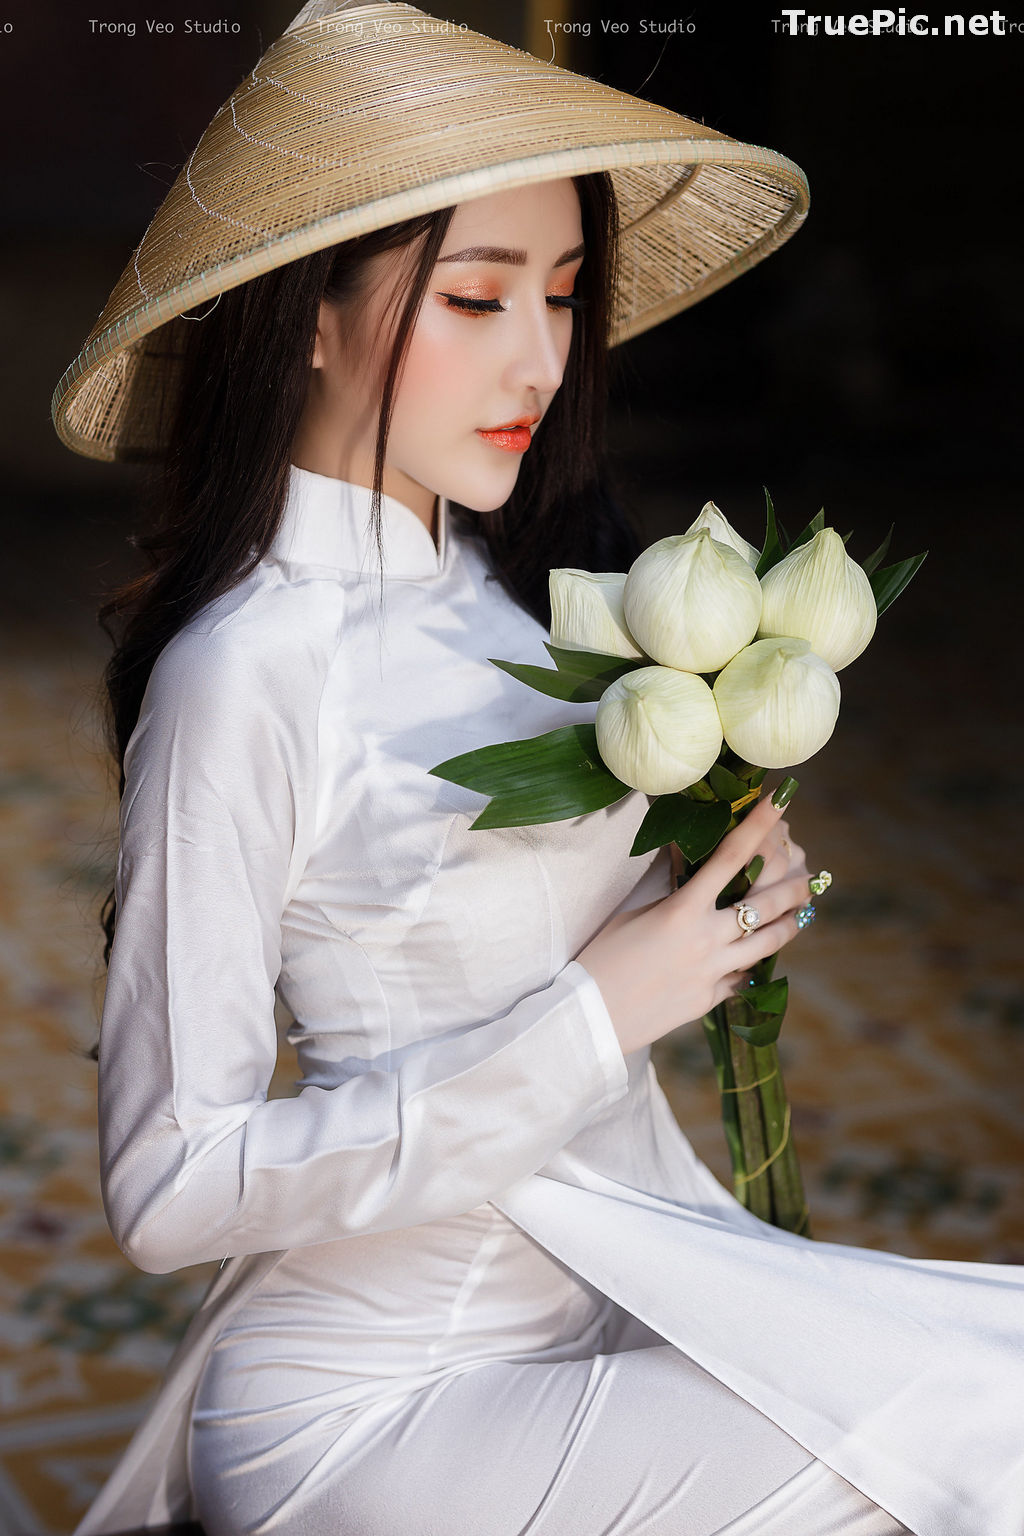 Image The Beauty of Vietnamese Girls with Traditional Dress (Ao Dai) #2 - TruePic.net - Picture-28